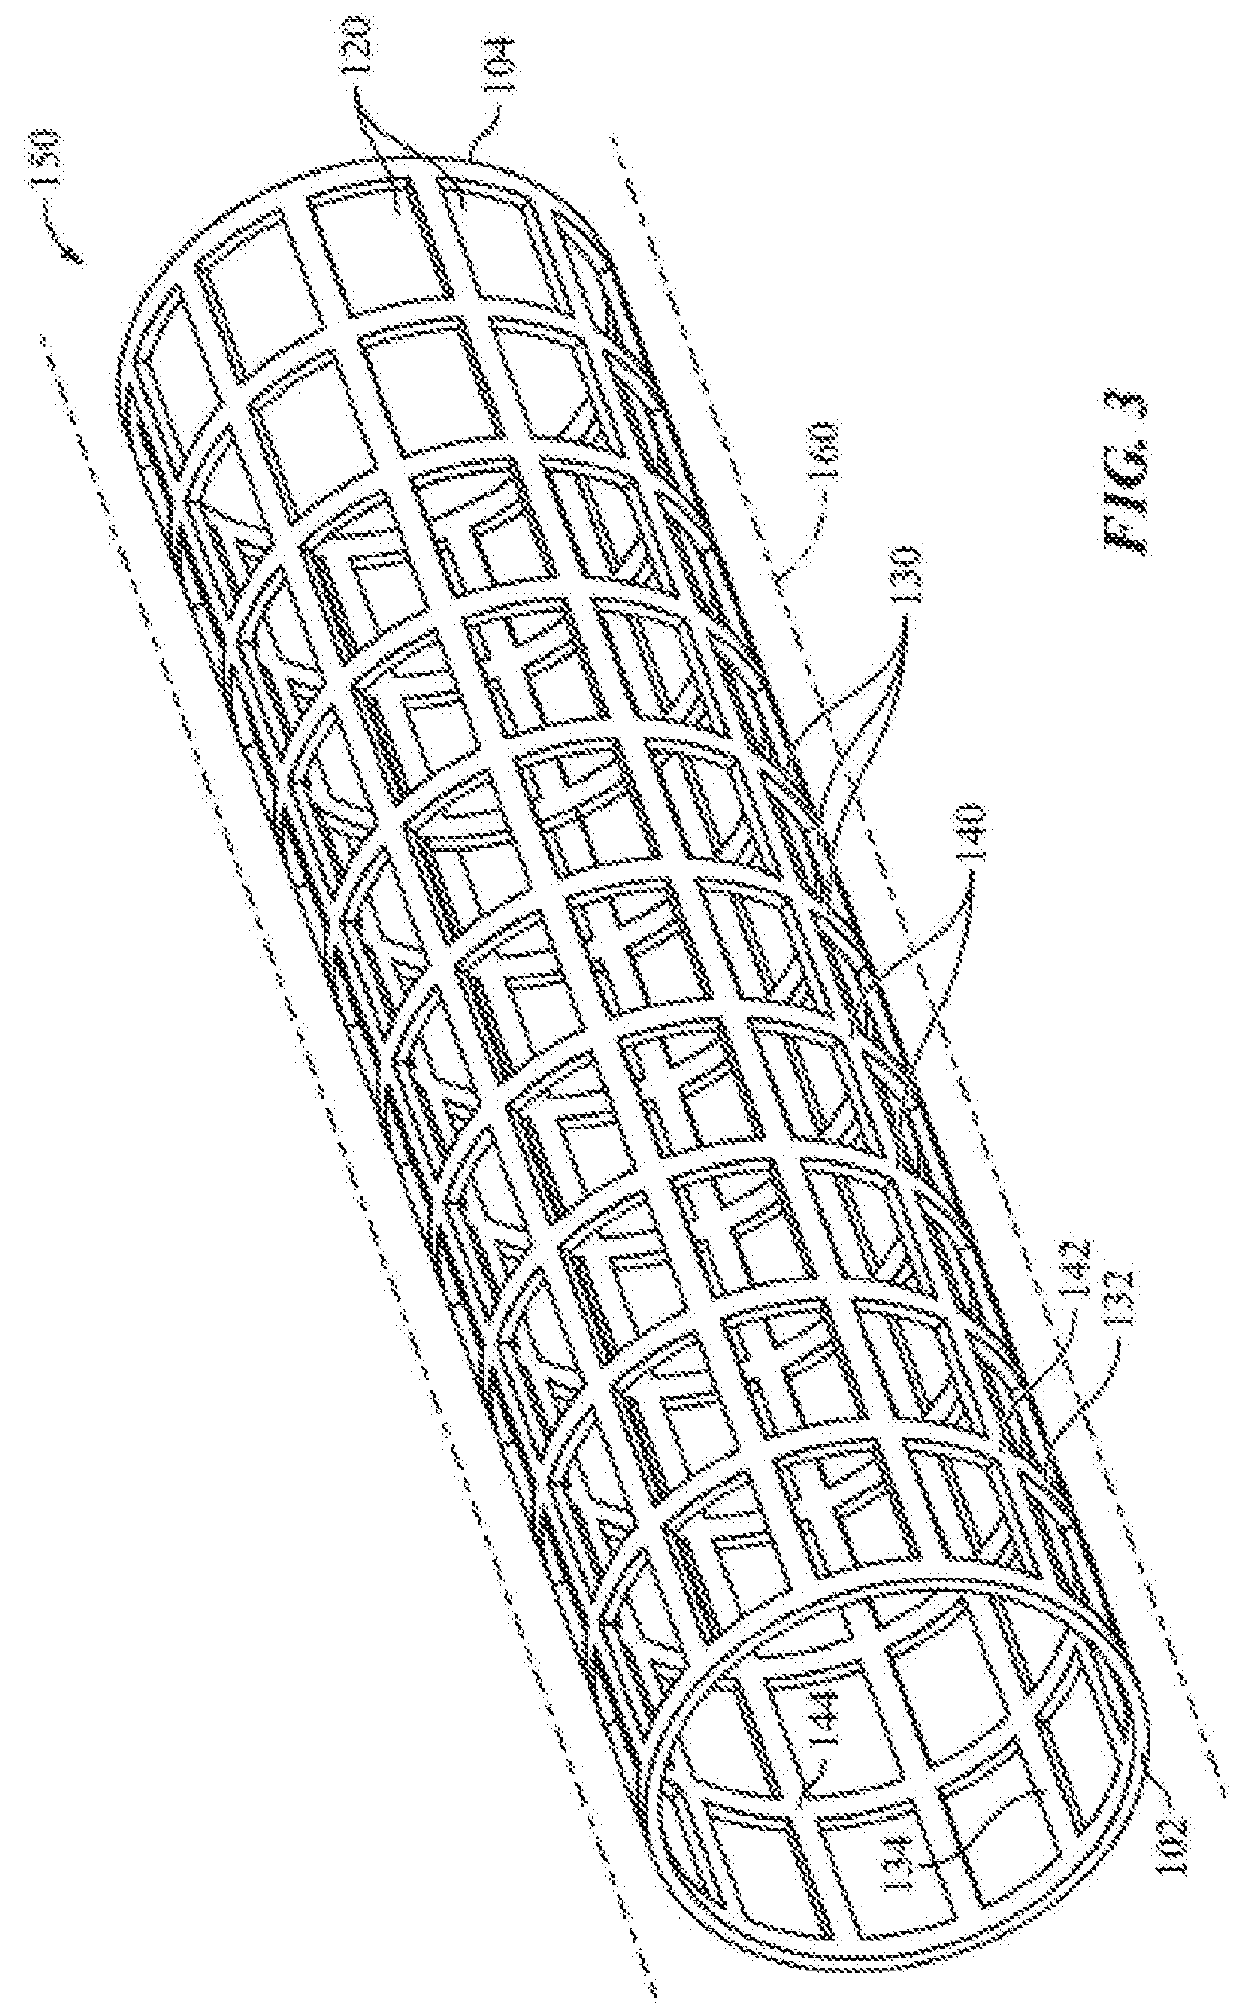 Stent with a smooth surface in its expanded configuration